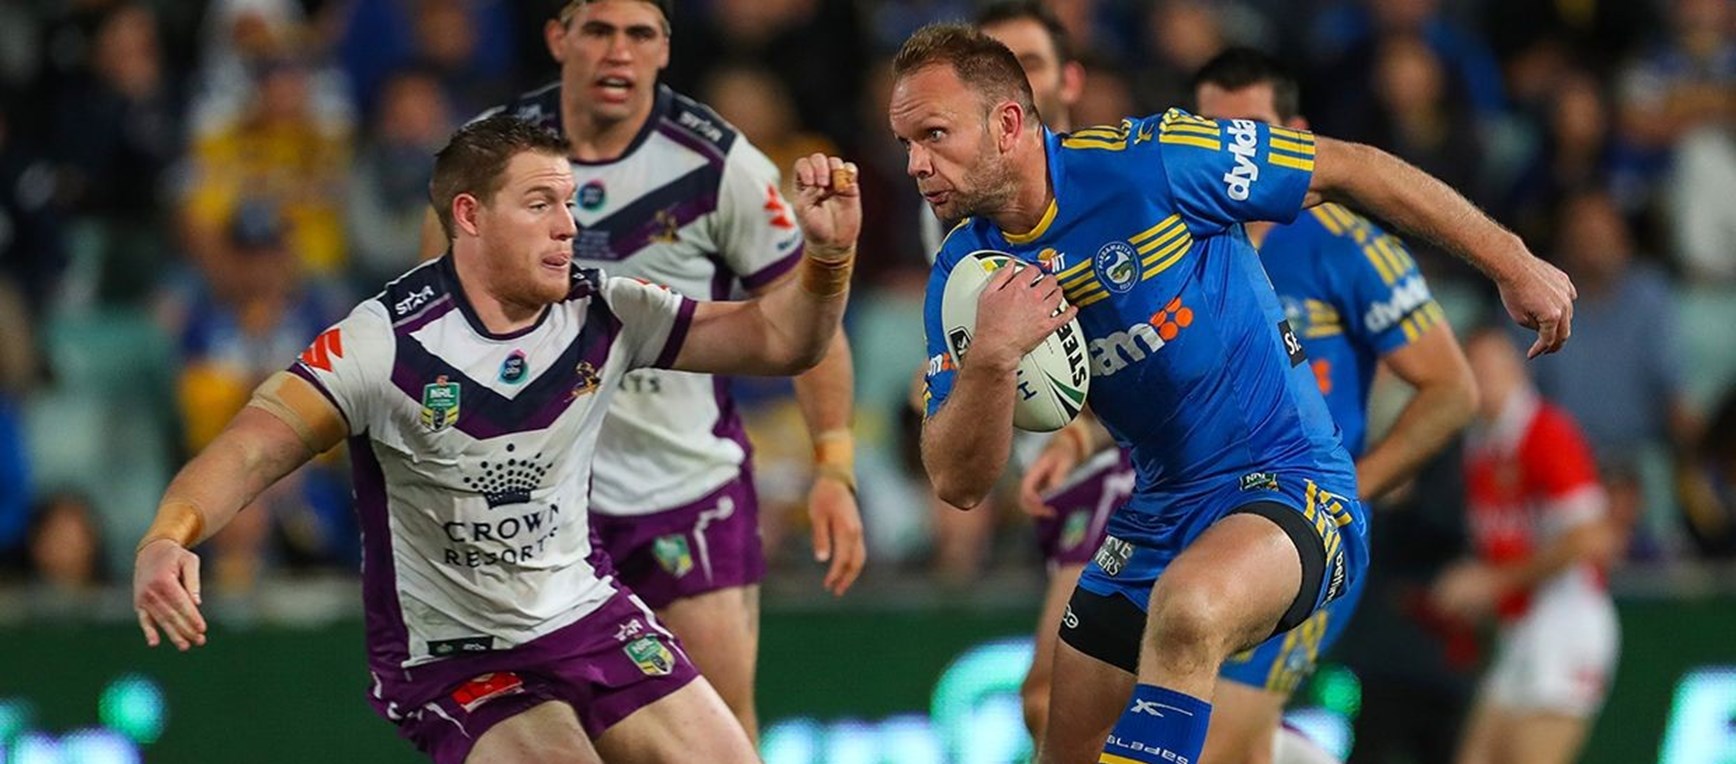 GALLERY | Eels v Storm, Round 11